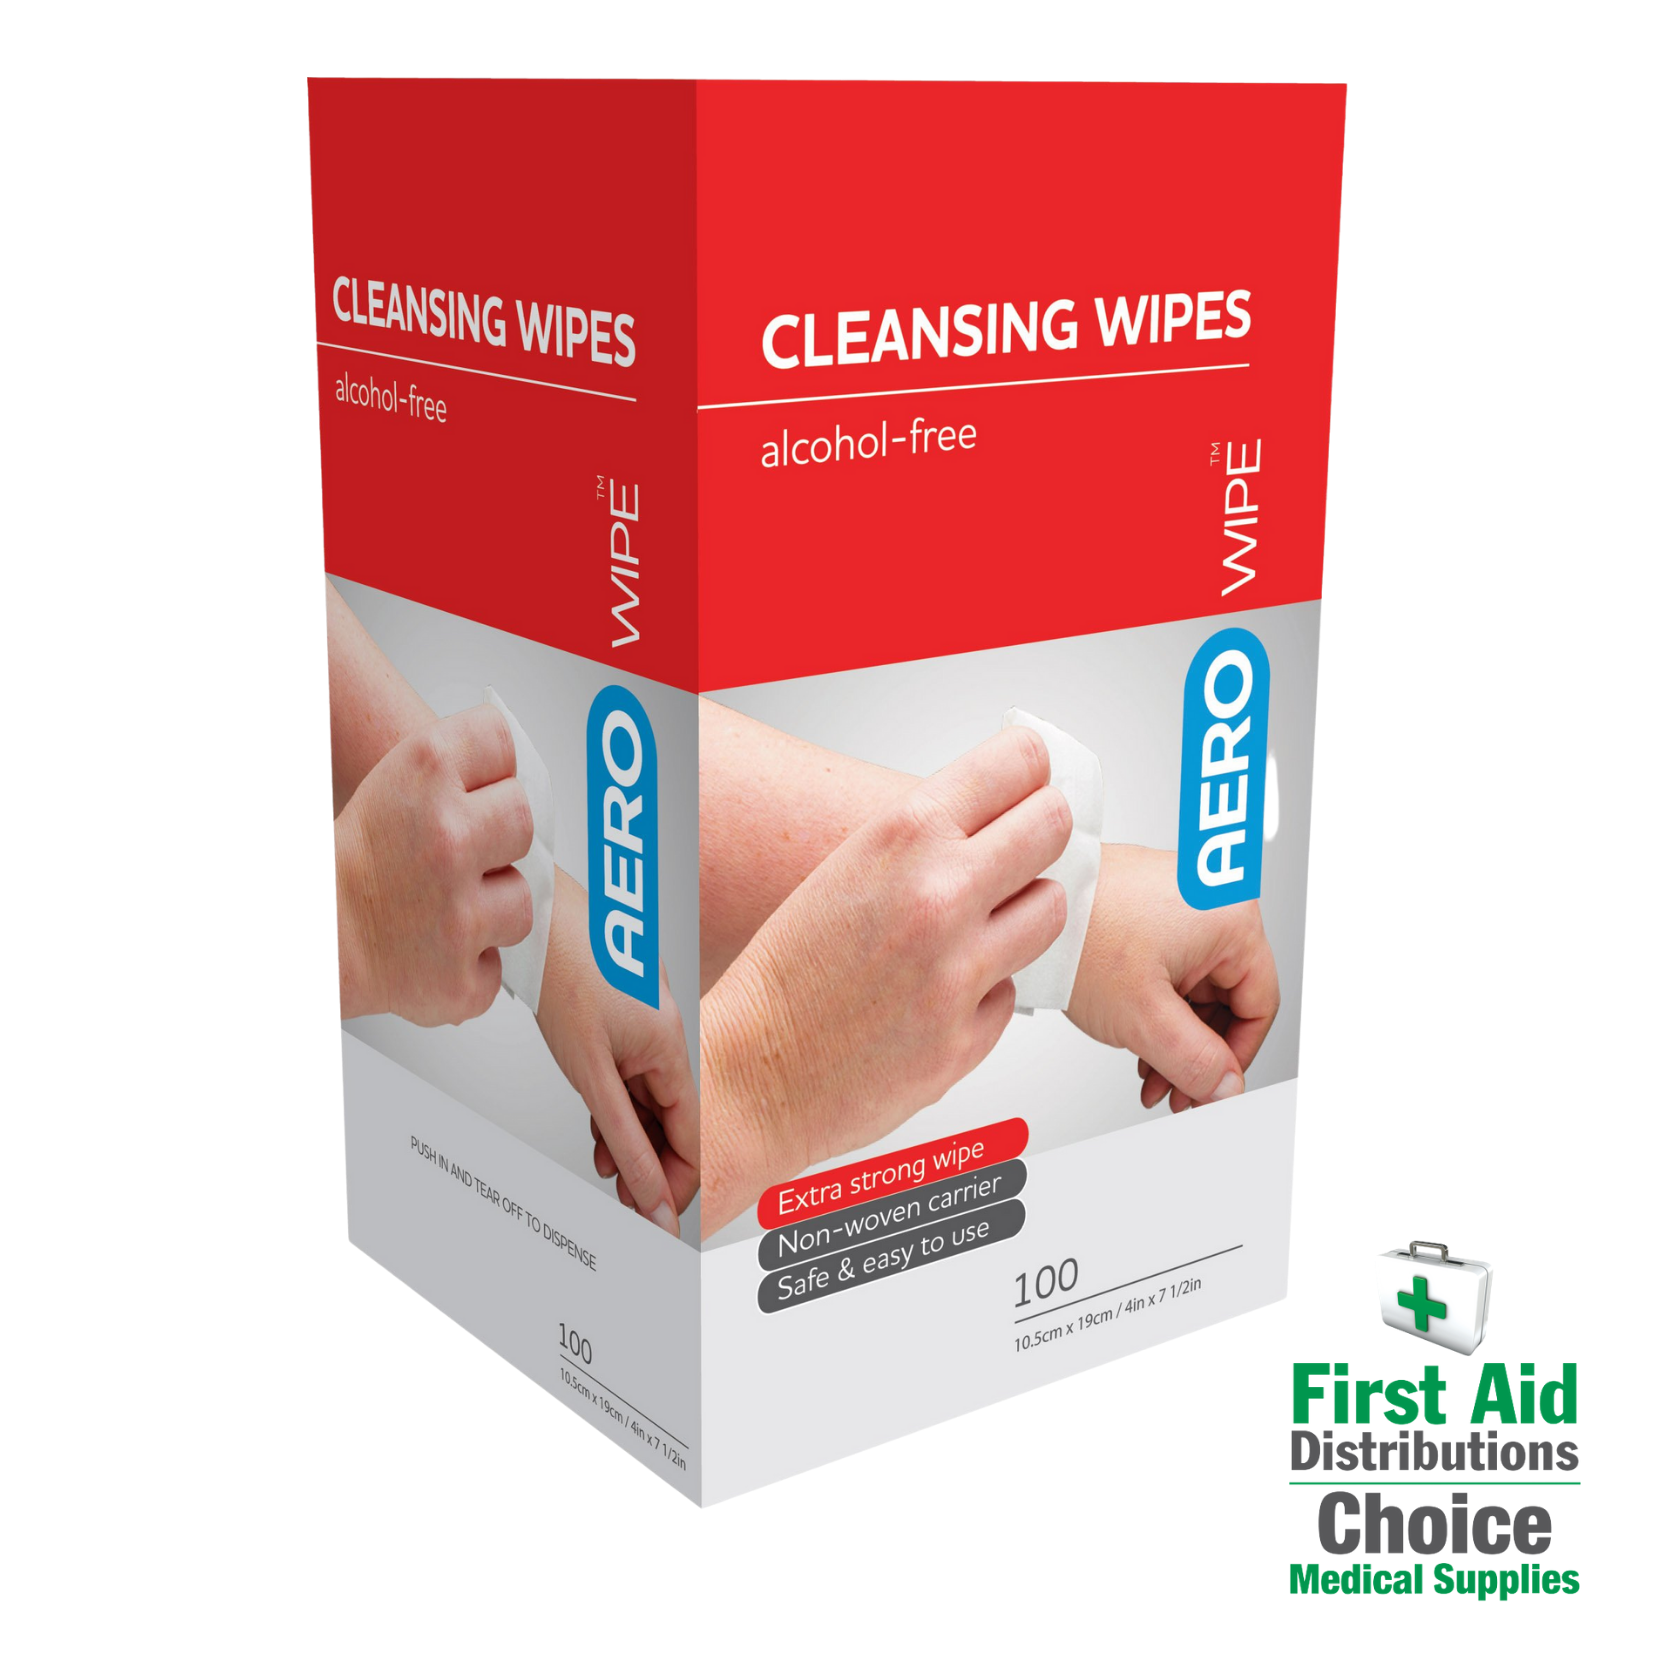 collections/Aero_Antiseptic_Wipes_Box_First_Aid_Distributions.png